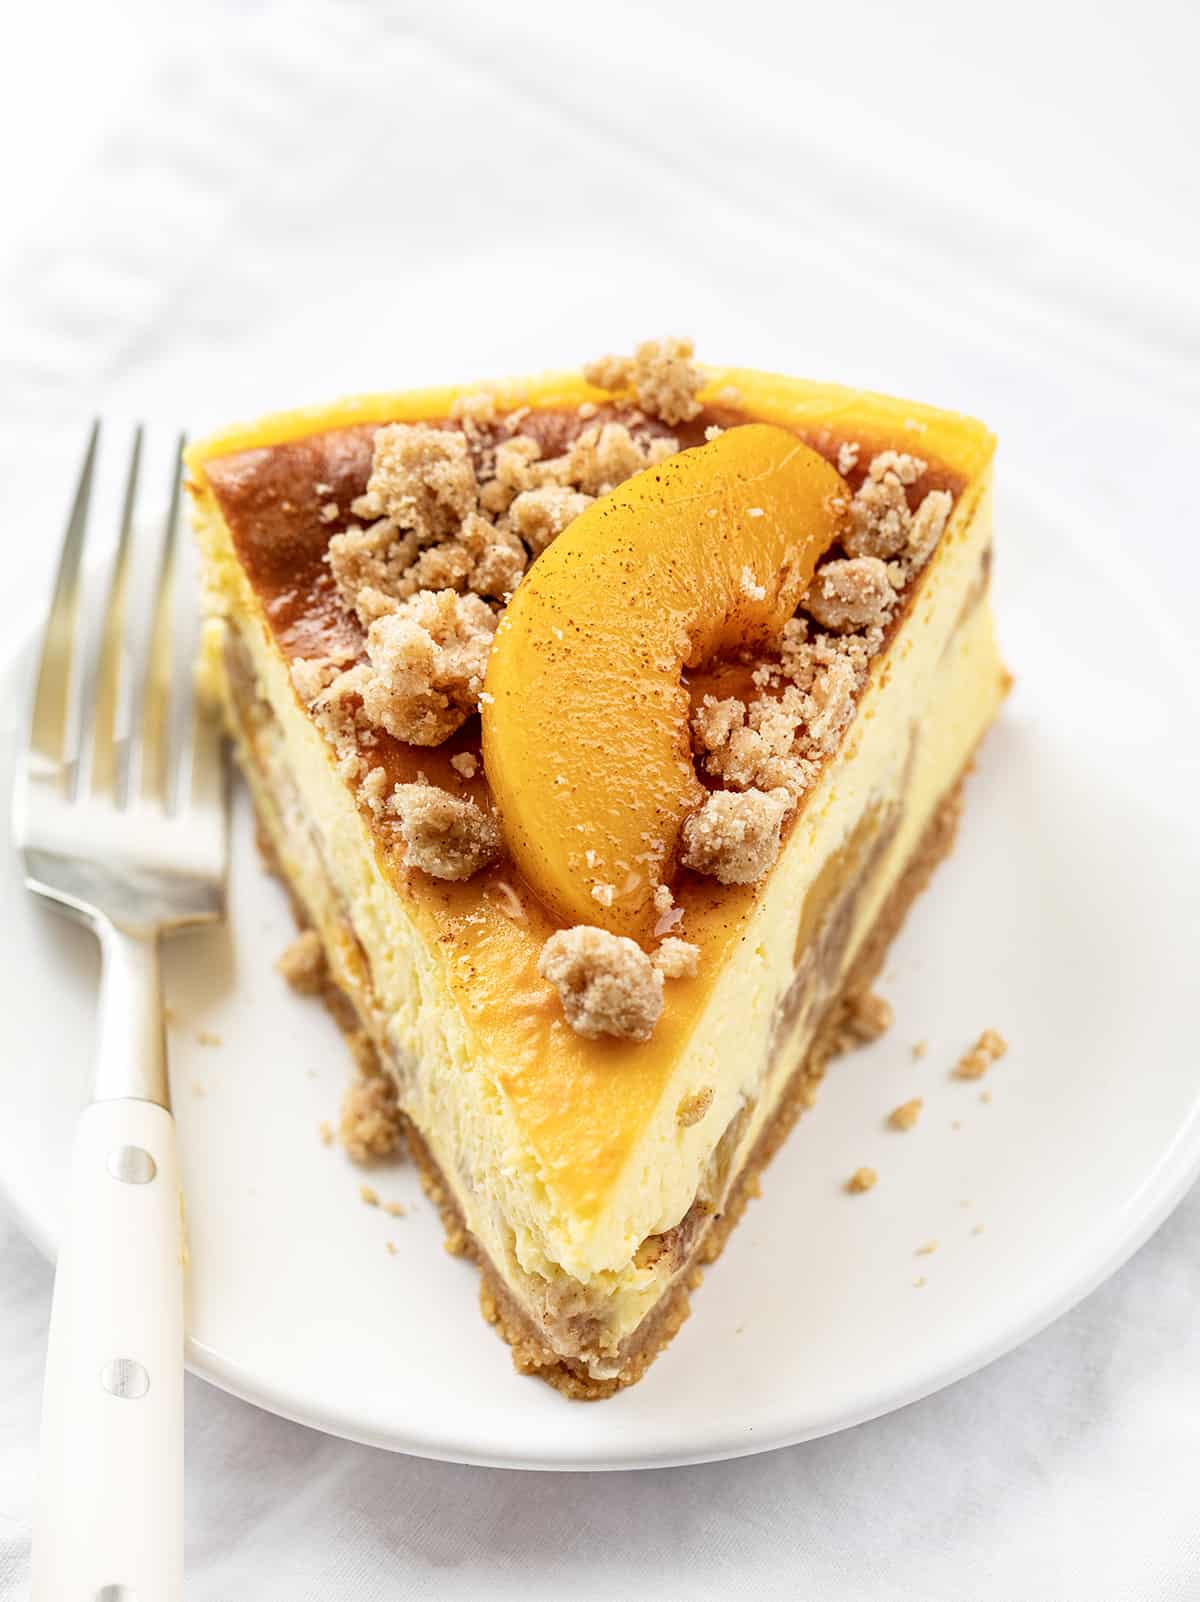 Slice of Peach Crumble Cheesecake on a White Plate with a White Fork.